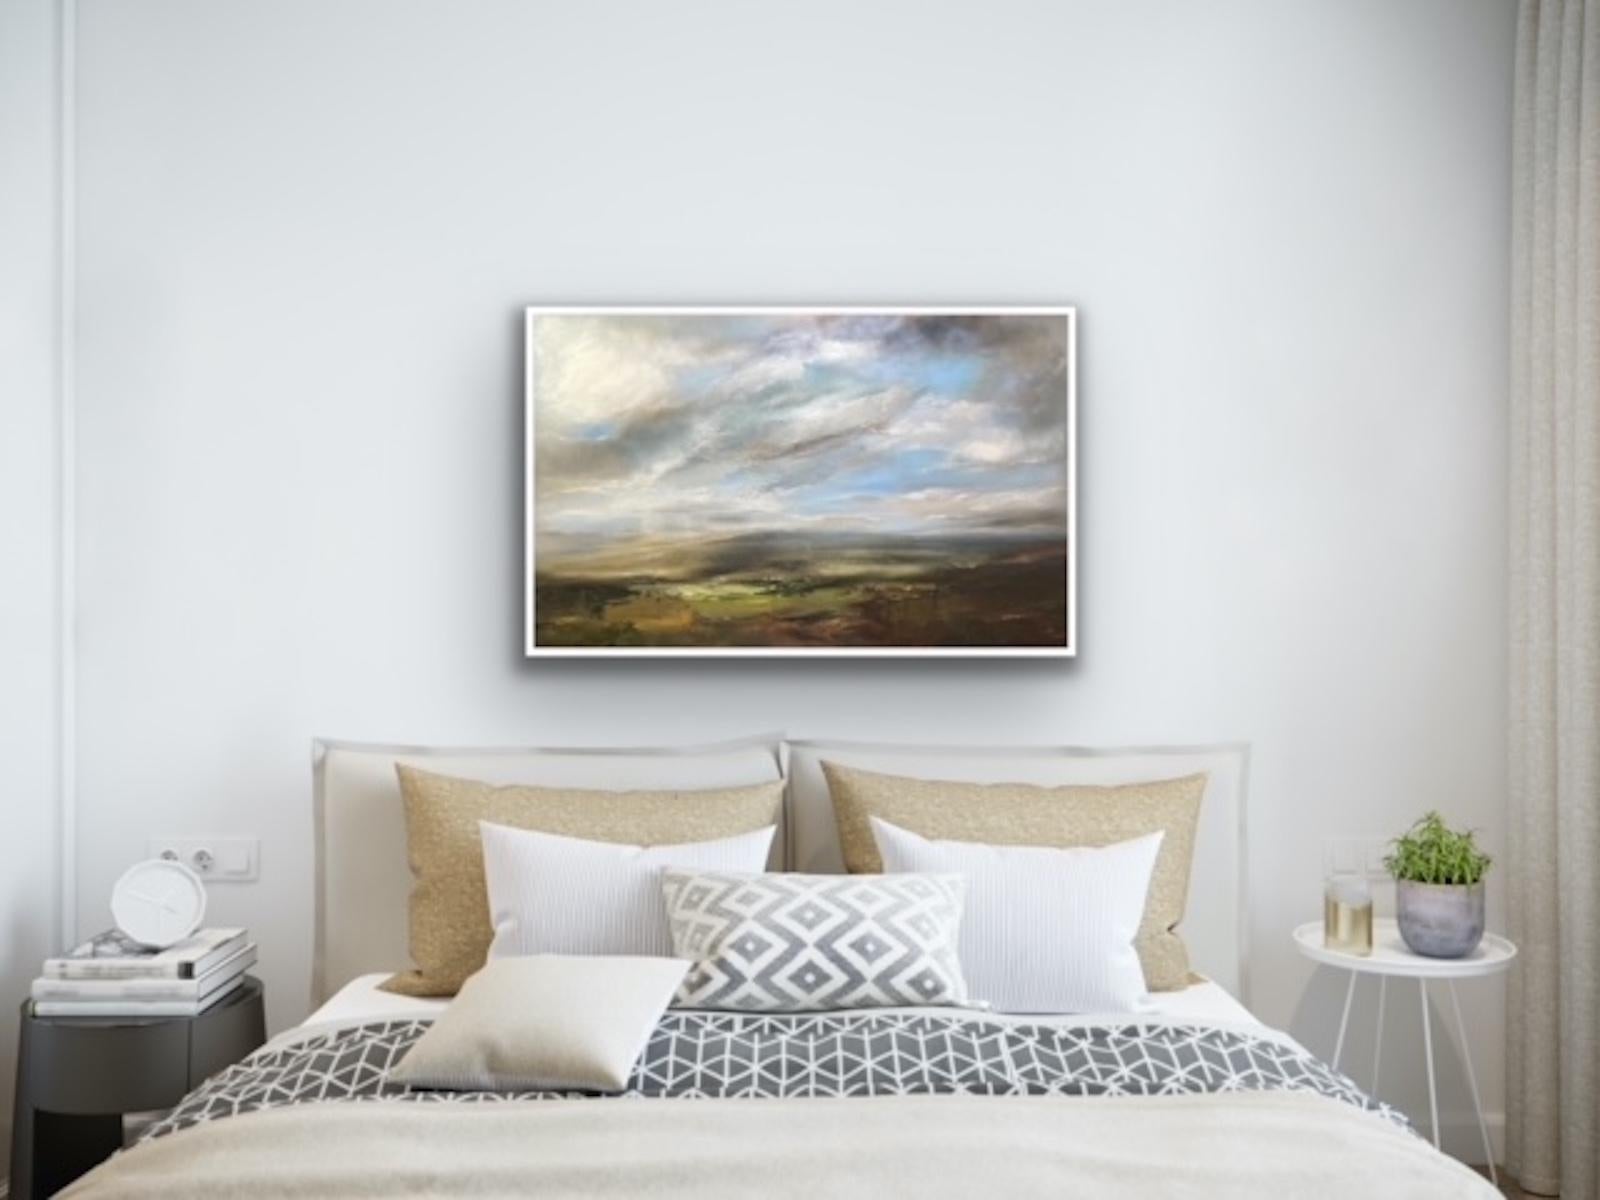 At Peace by Helen Howells, Landscape painting, Horizon, Rambling 8